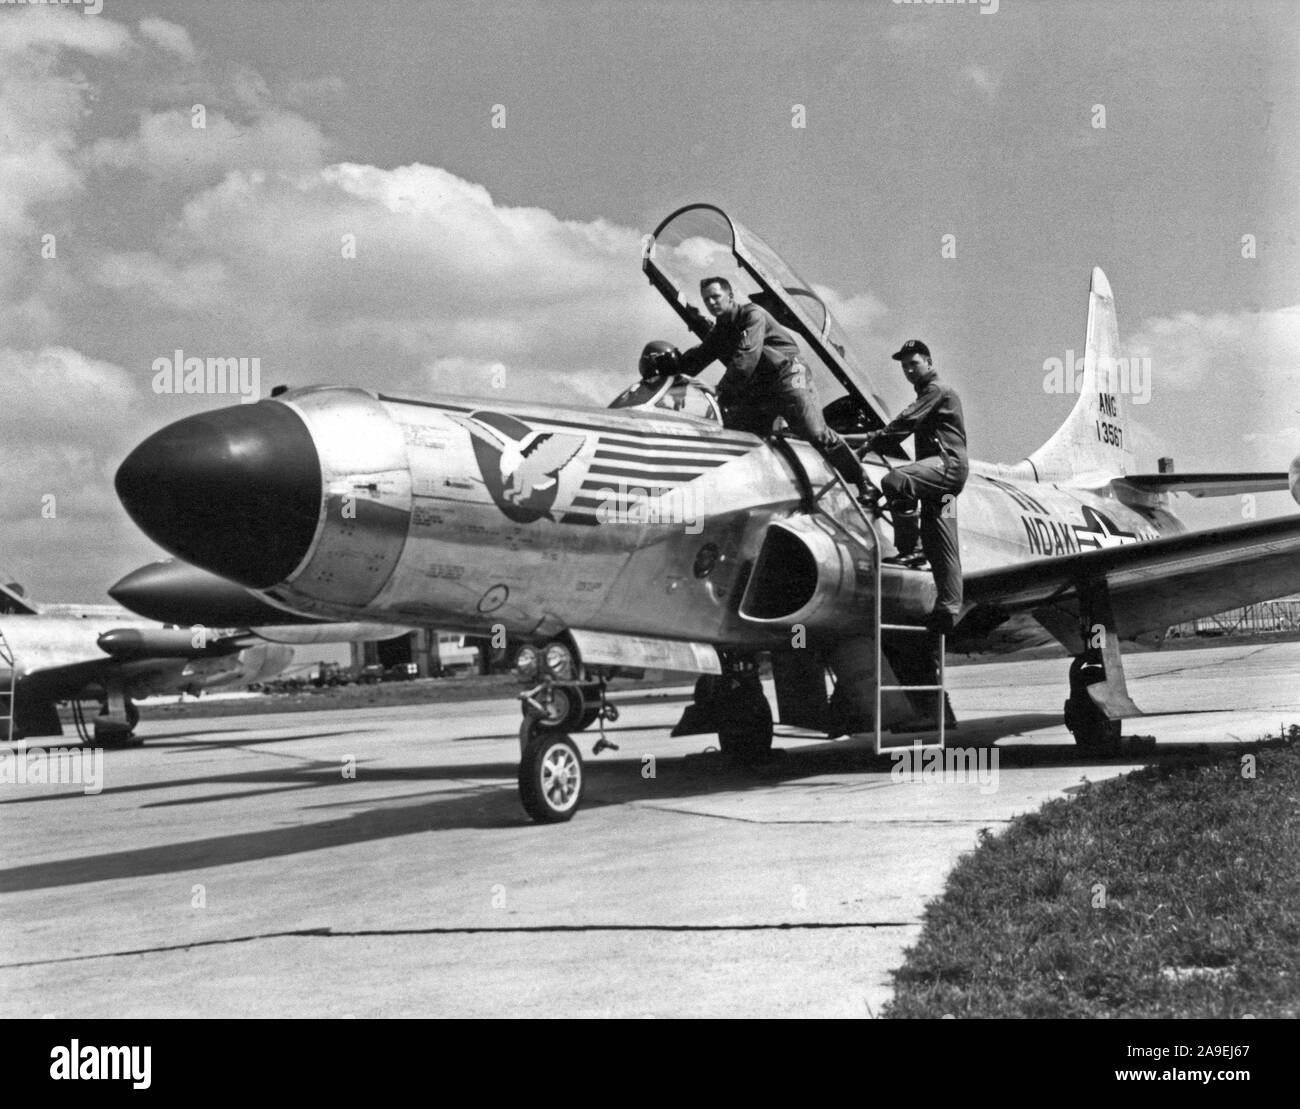 1958 - U.S. Air Force personnel assigned to the 119th Fighter Wing 'Happy Hooligans', North Dakota Air National Guard, Robert Groom and Neil Modin, photographed with their F-94 A/C Starfire aircraft at Hector Field, North Dakota. The 'Happy Hooligan' pilots flew the F-94 A/C Starfire aircraft from 1954-to-1960. Stock Photo